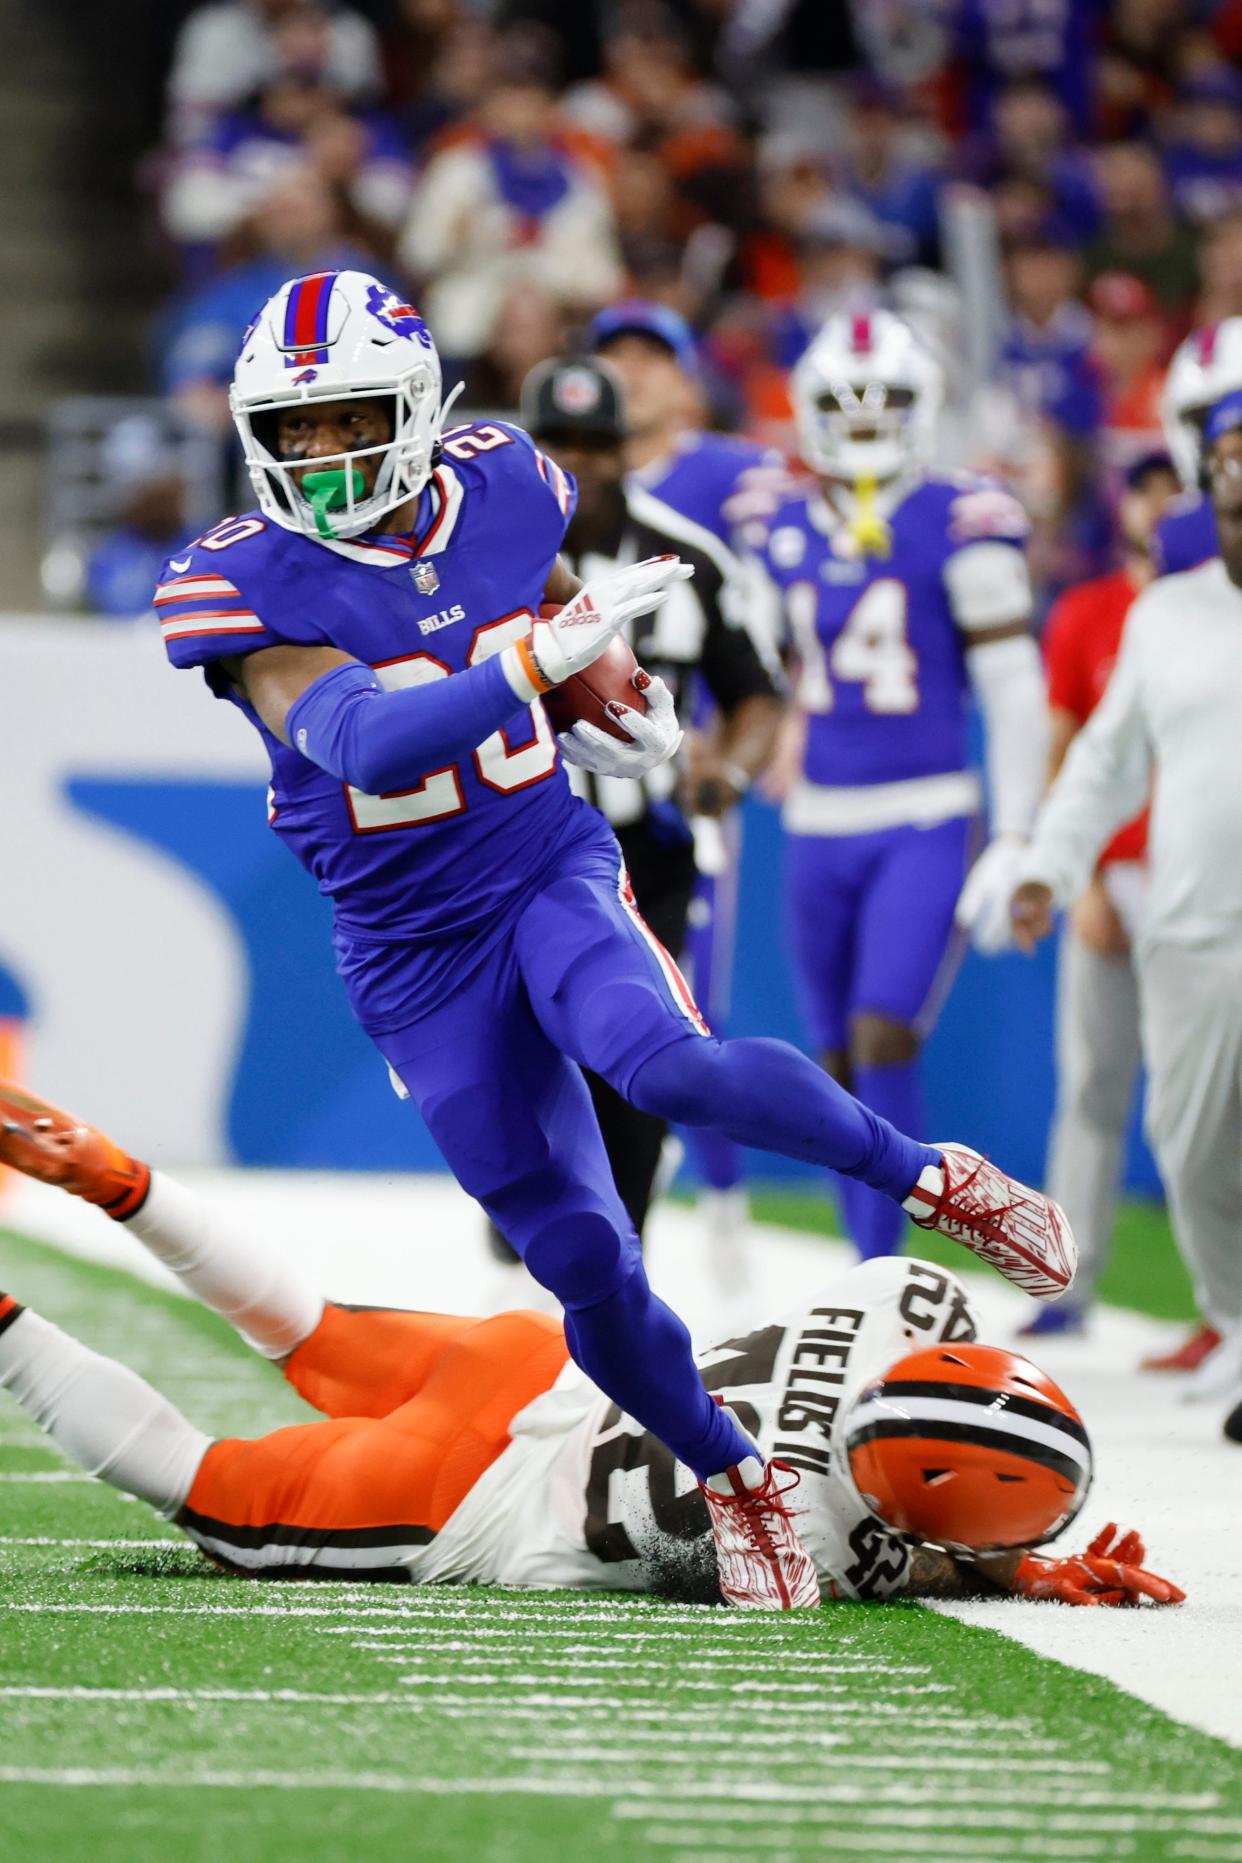 Buffalo Bills running back Nyheim Hines (20) runs the ball on a kick return against the Cleveland Browns on Nov. 20, 2022, in Detroit.